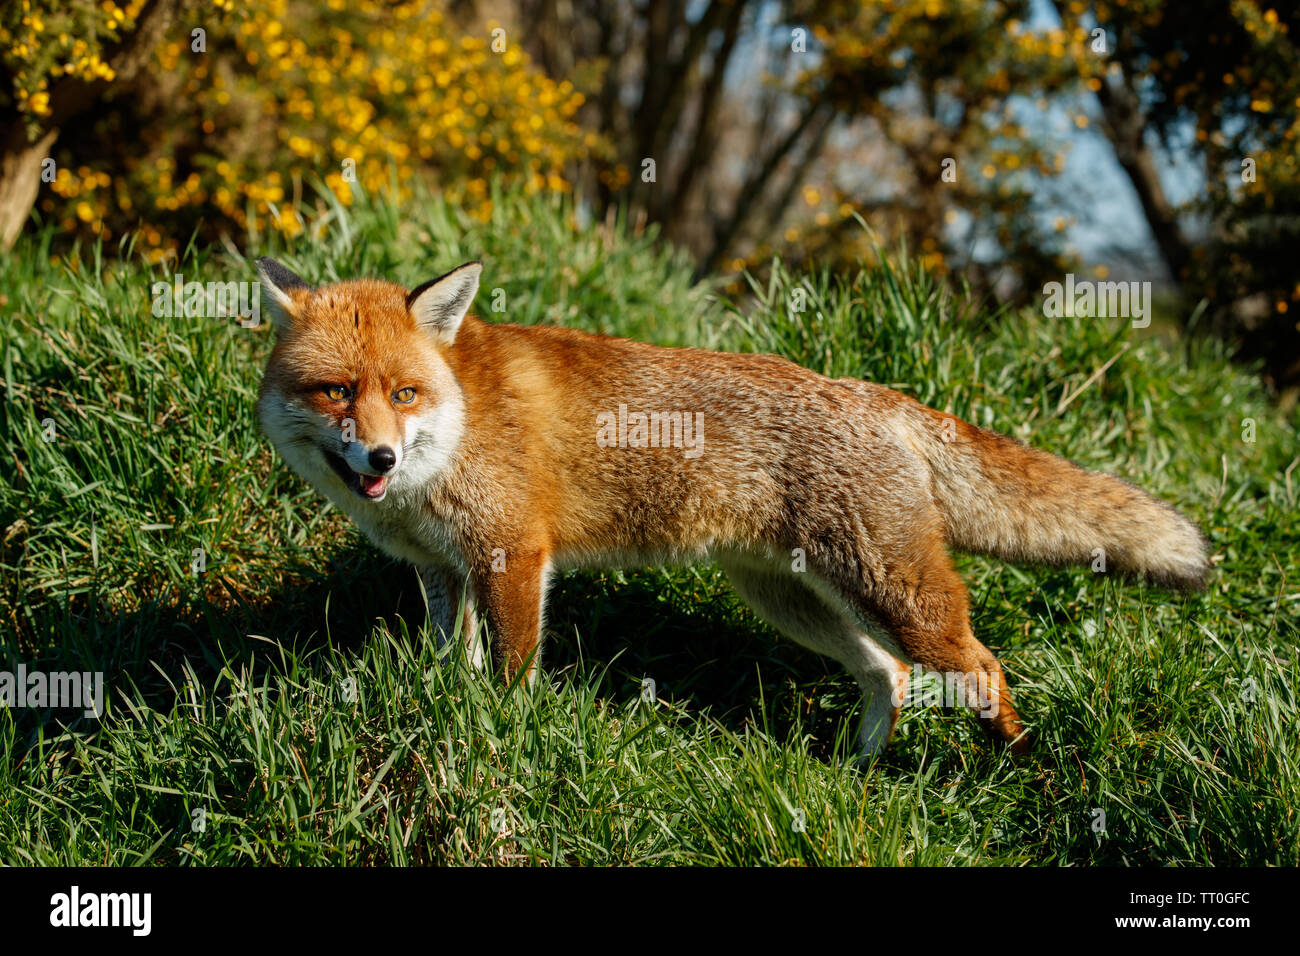 Rosso europeo volpe (Vulpes vulpes) Foto Stock